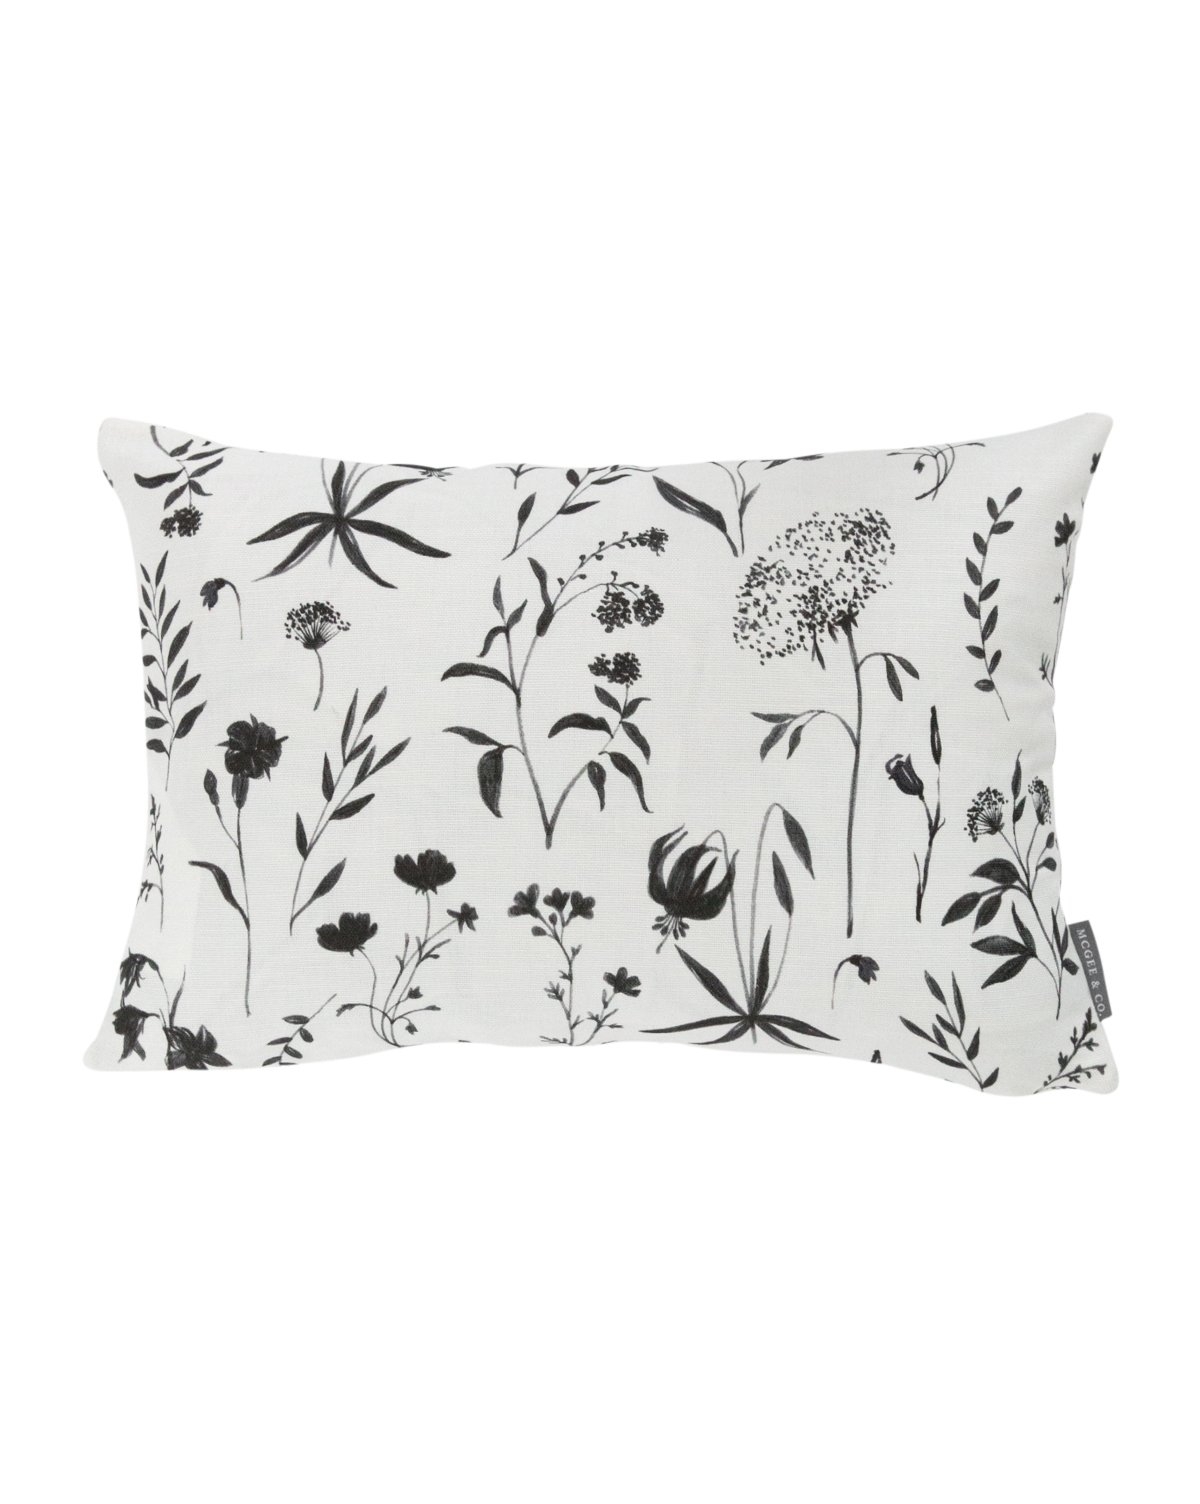 JUNO FLORAL PILLOW WITHOUT INSERT, WHITE, 14" x 20" - Image 0